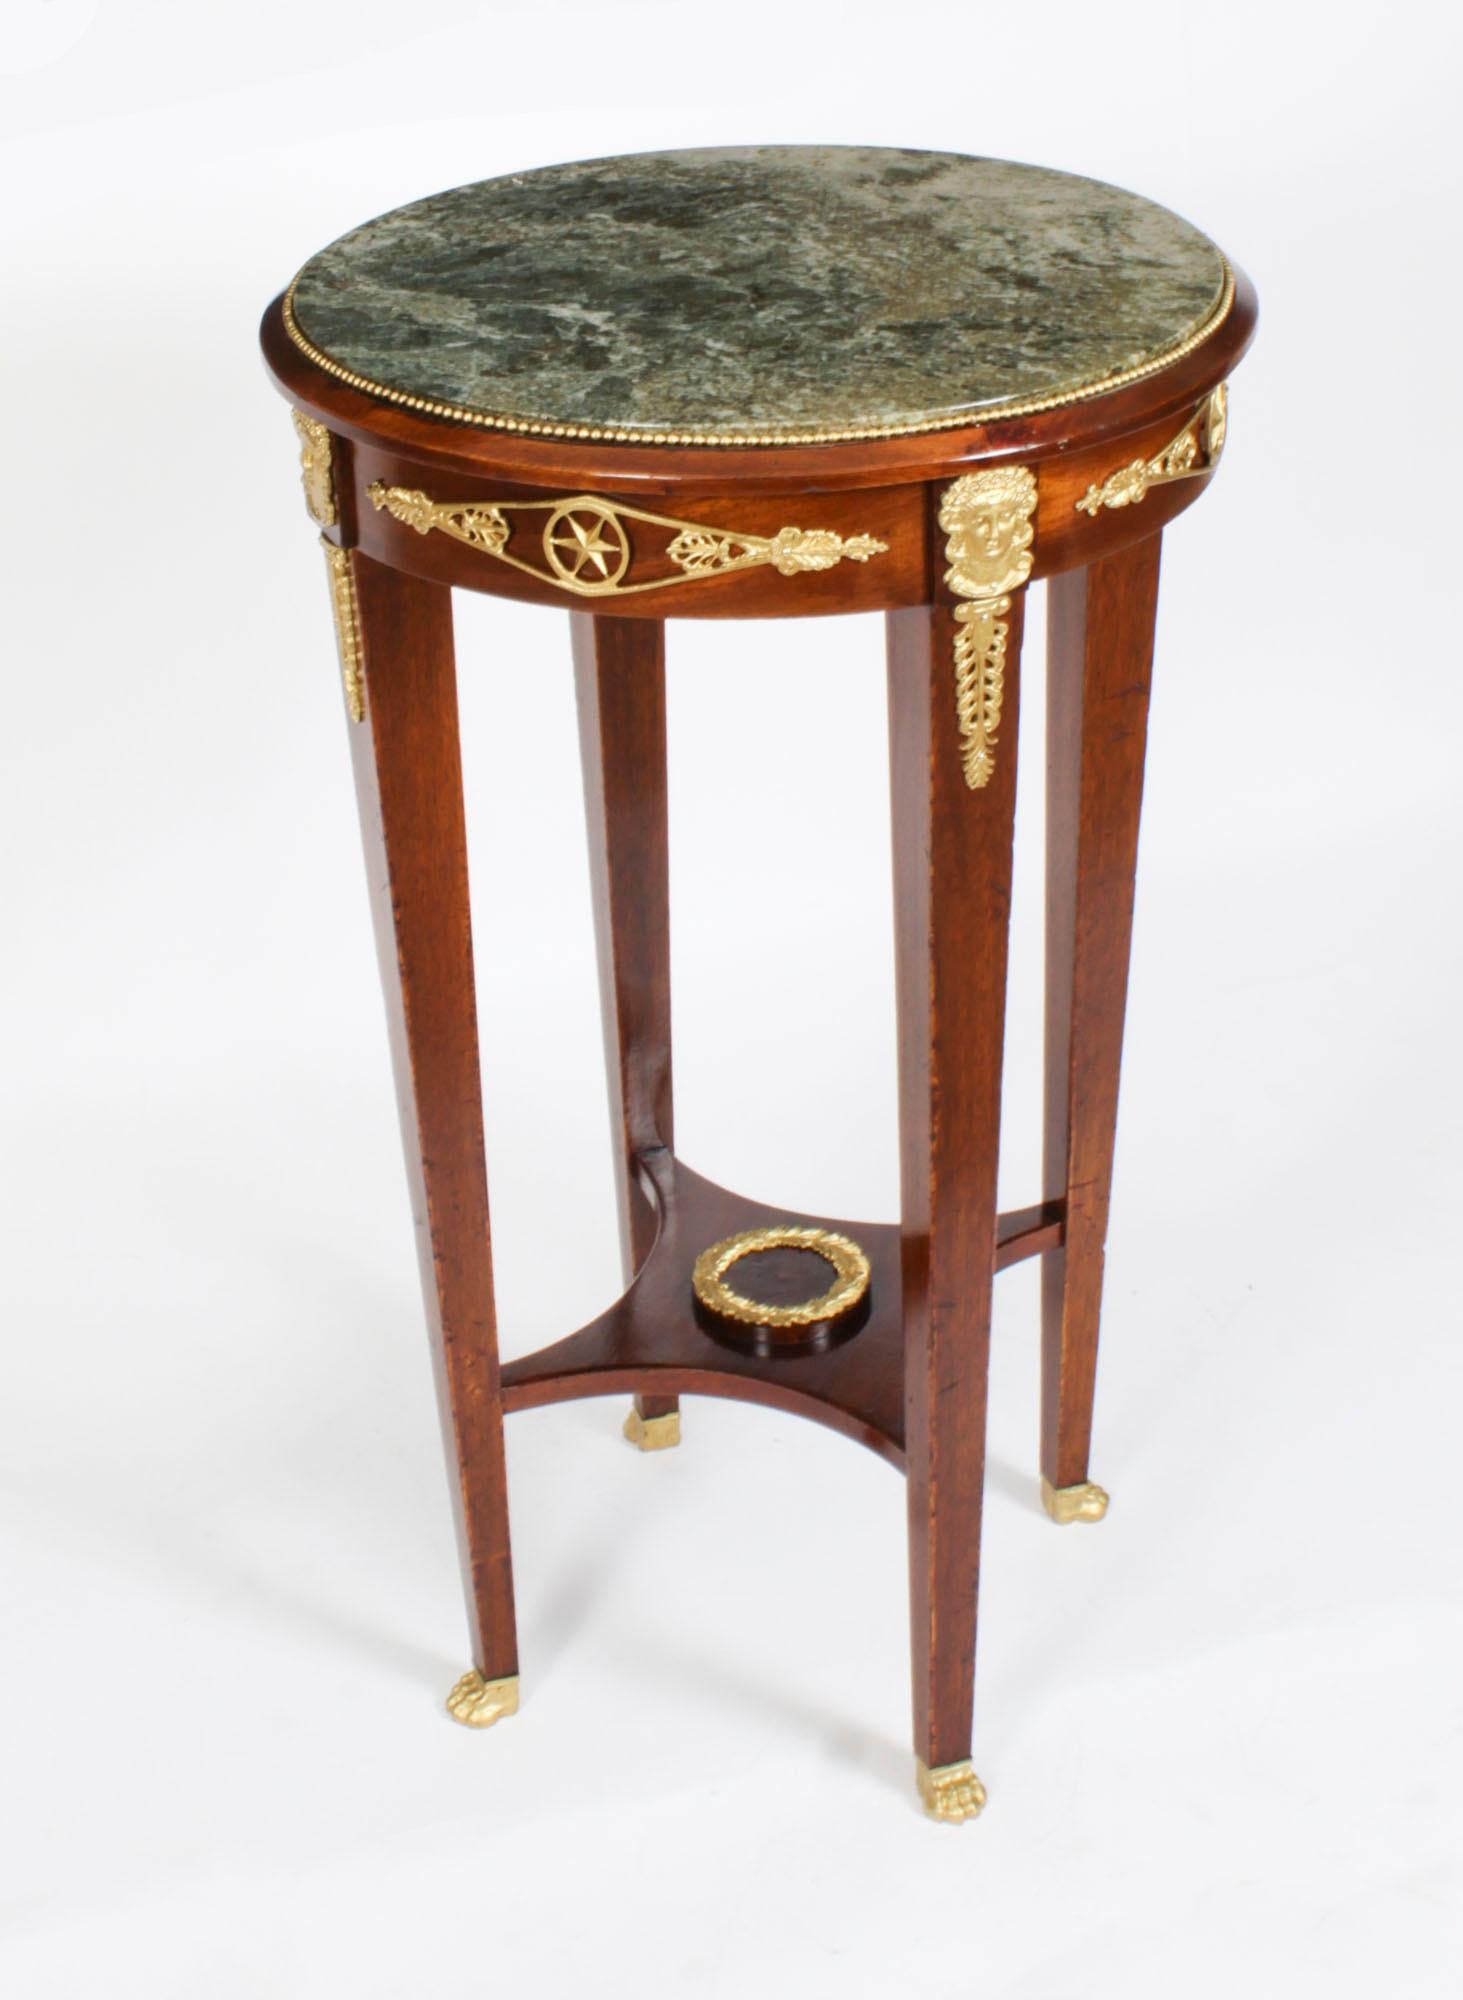 This is a beautiful antique French Empire circular occasional table with ornate ormolu decoration typical of the Empire period and a beautiful inset Verde Antico green marble top, circa 1860.

It is masterfully crafted in a deep rich mahogany with